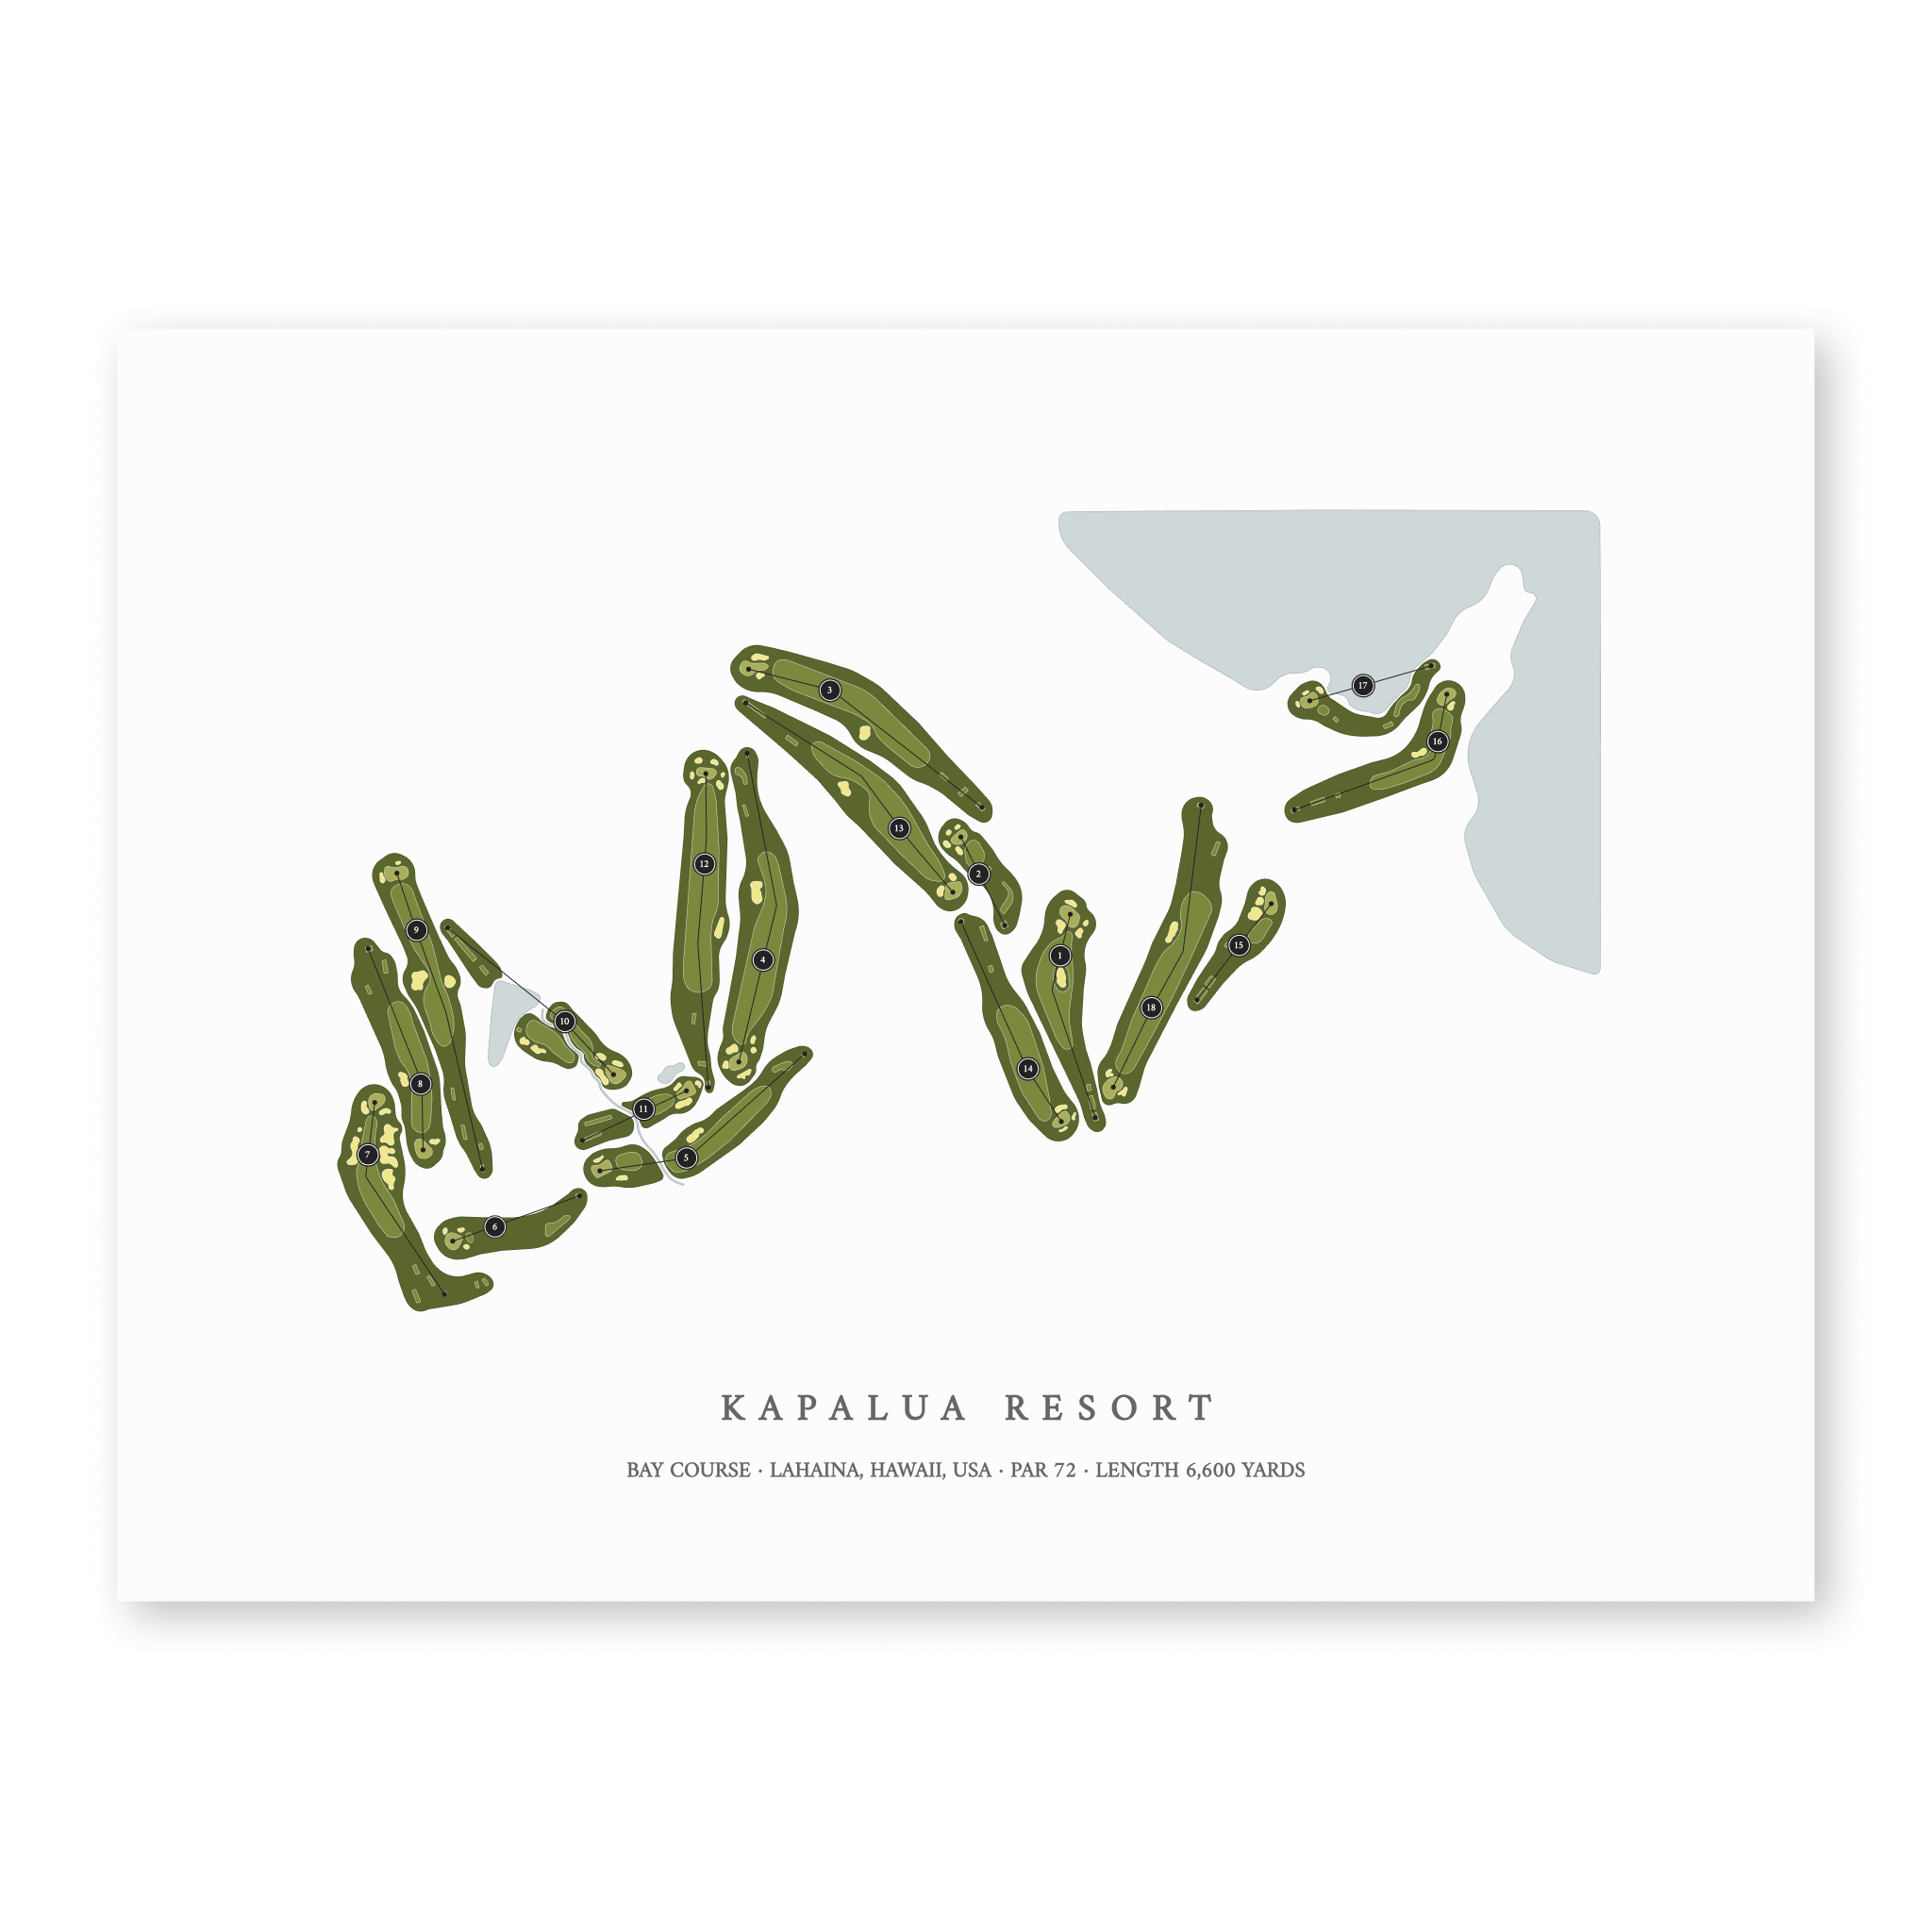 Kapalua Resort - The Bay Course| Golf Course Print | Unframed With Hole Numbers #hole numbers_yes